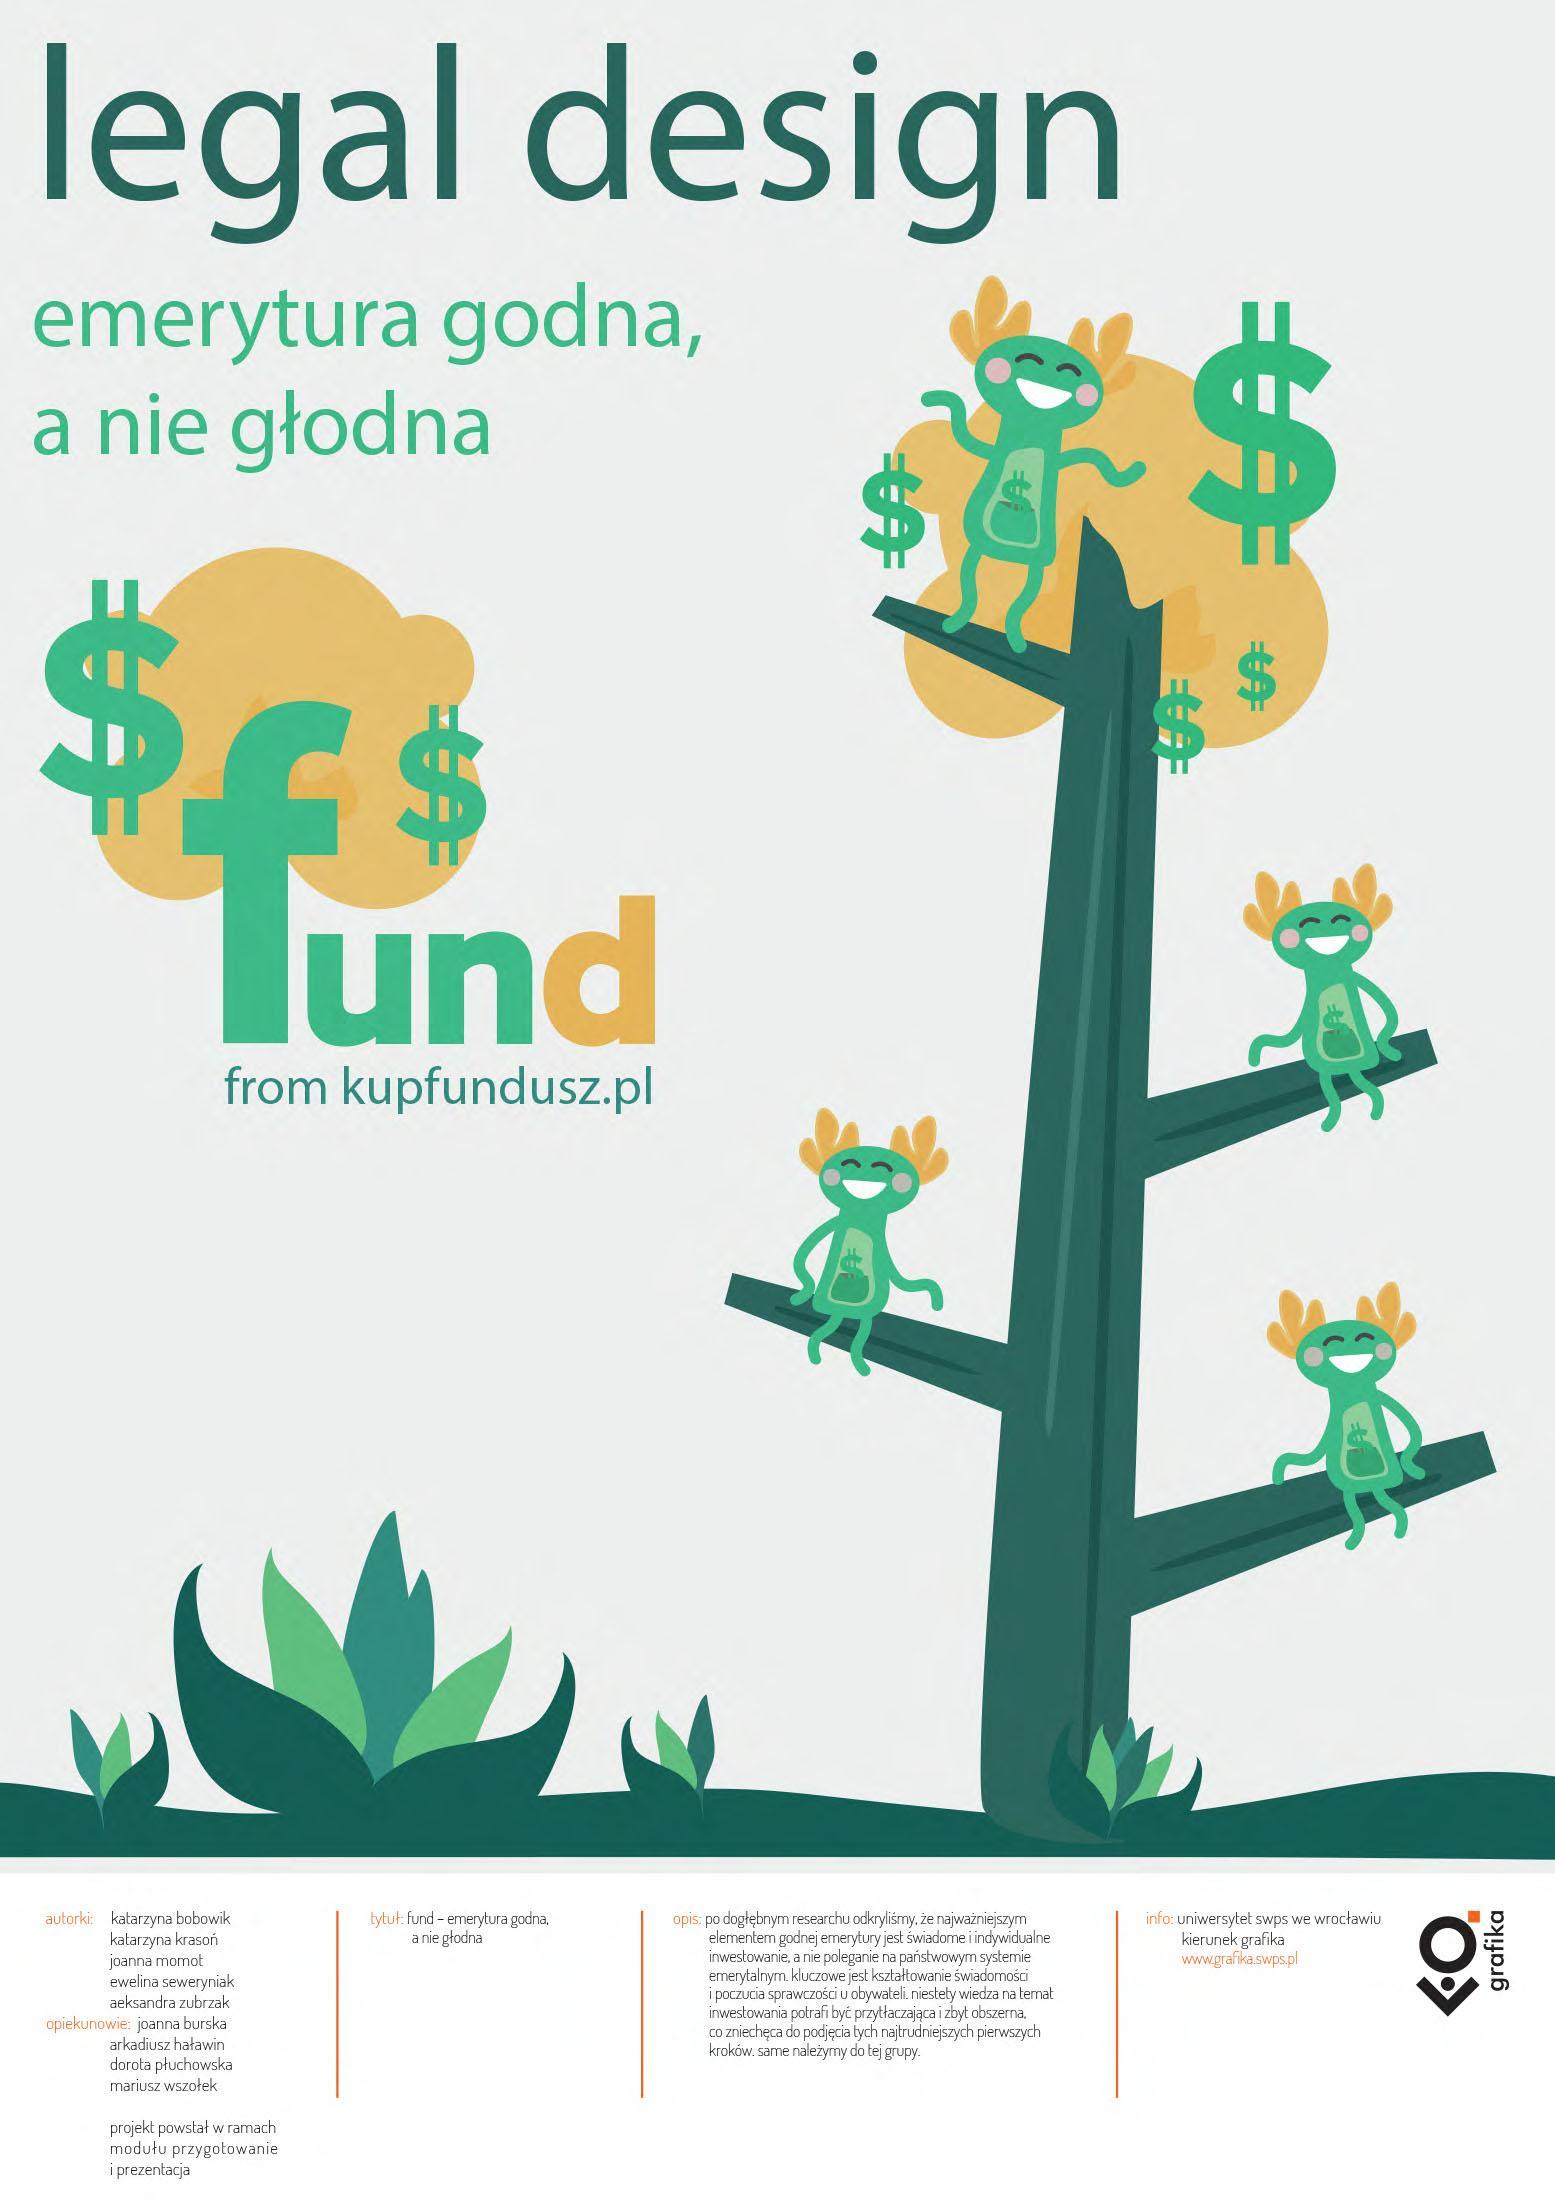 Poster illustrating the legal design project; smiling banknote-like green creatures sitting on a tree